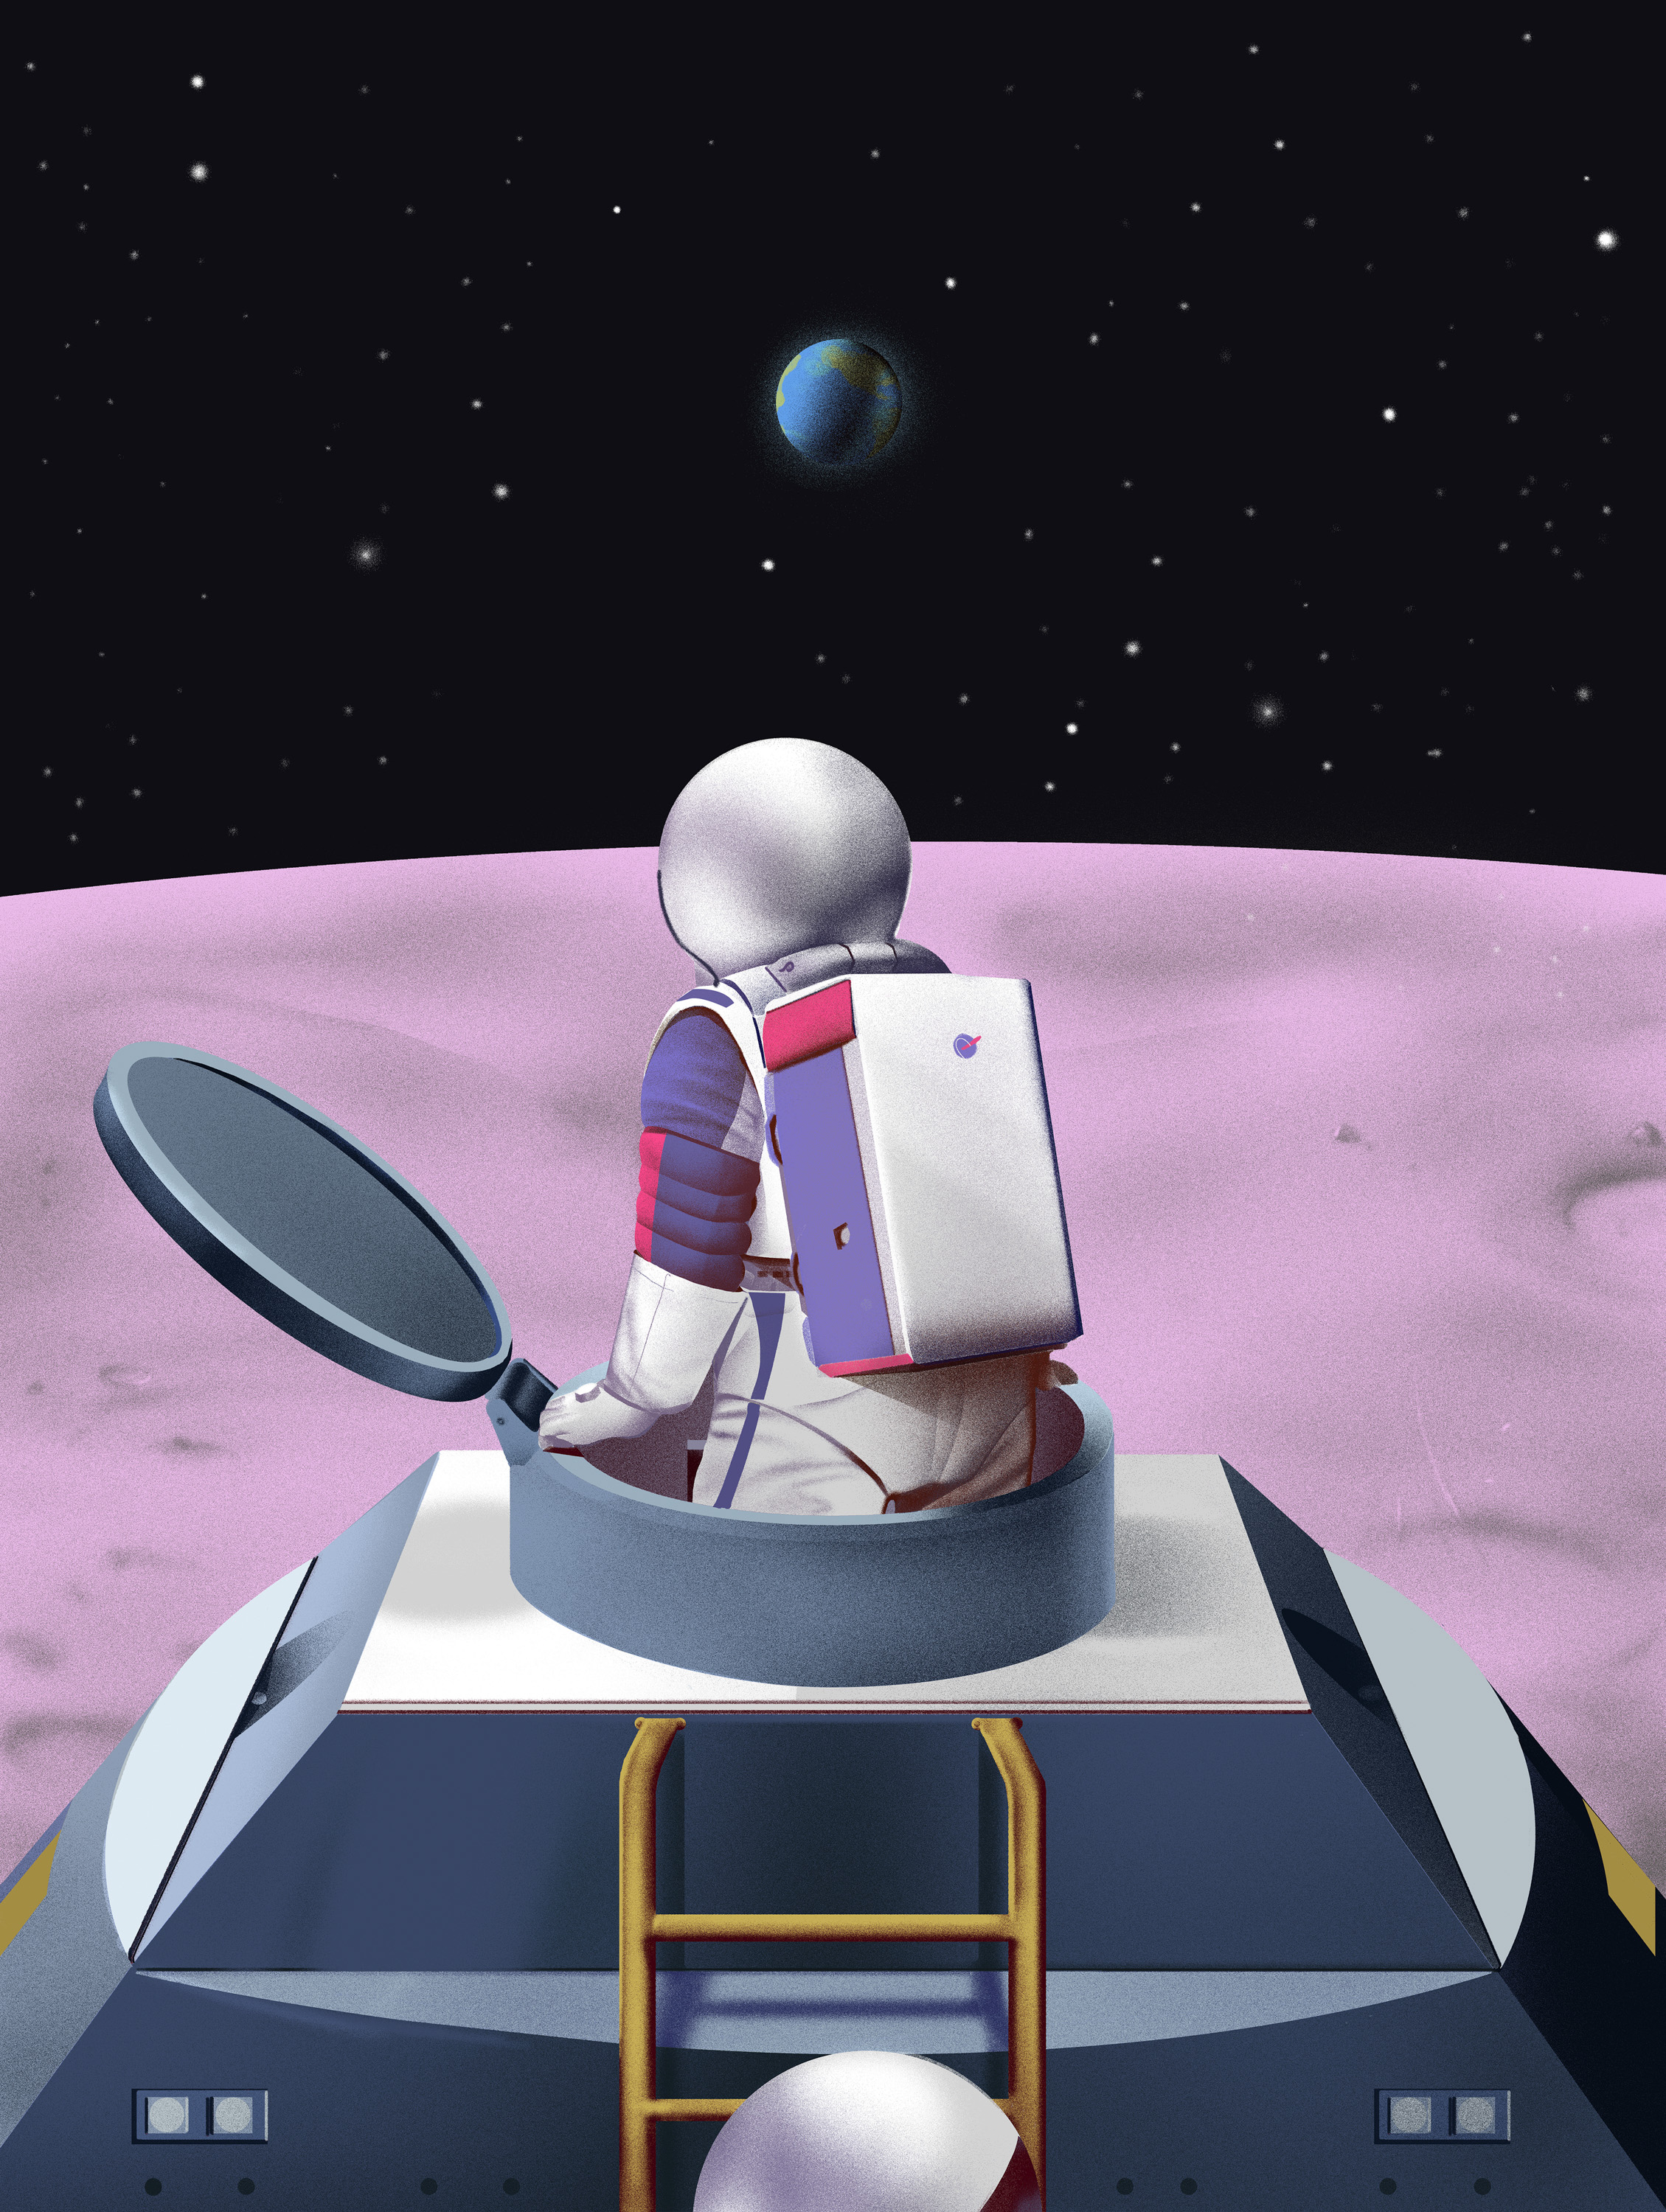 illustration of an astronaut emerging from the hatch of a lunar vehicle